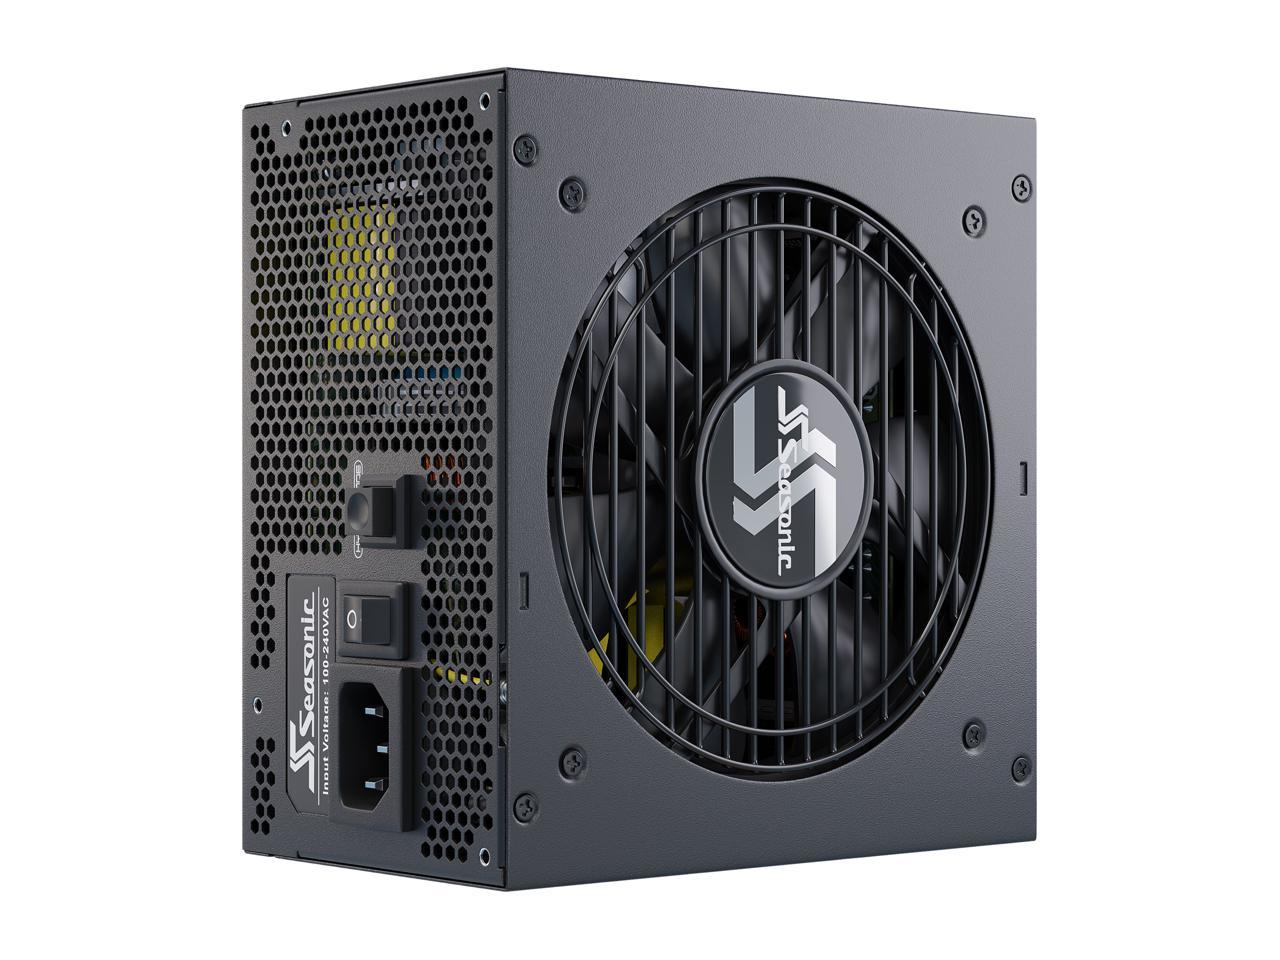 Seasonic FOCUS GX-650, 650W 80+ Gold, Full-Modular, Fan Control in Fanless, Silent, and Cooling Mode, 10 Year Warranty, Perfect Power Supply for Gaming and Various Application, SSR-650FX.